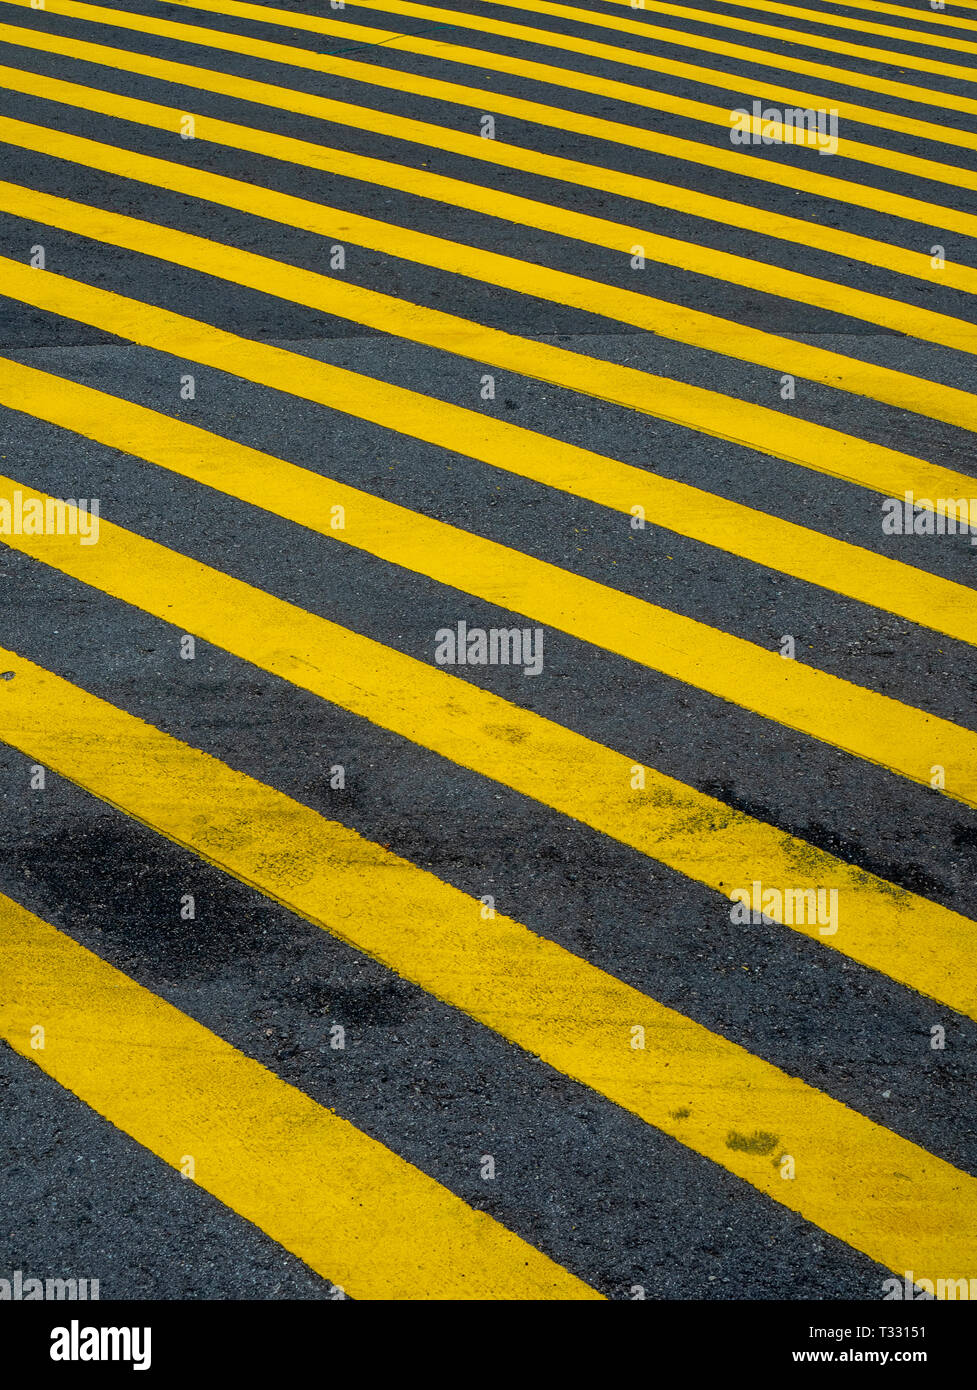 yellow stripes painted on a road. Stock Photo